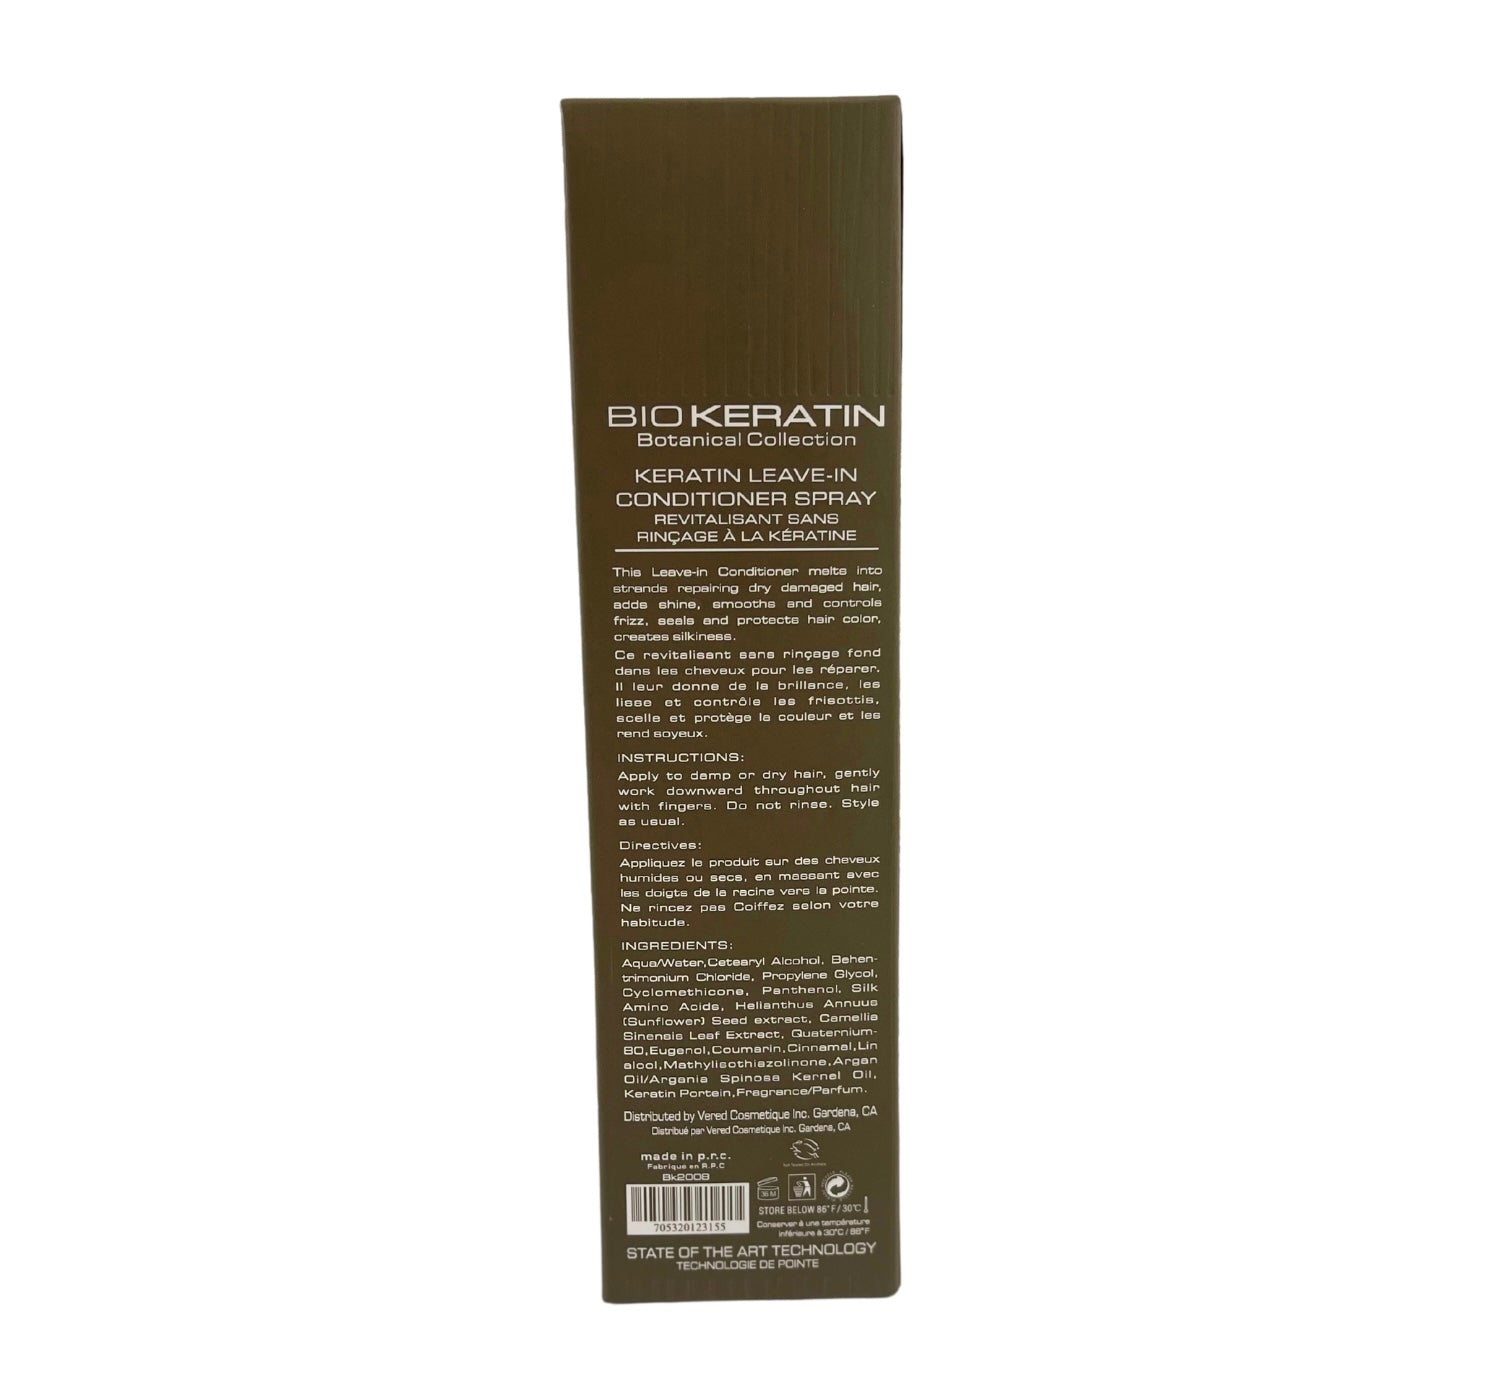 Biokeratin Botanical Collection Keratin Leave in Conditioner spray